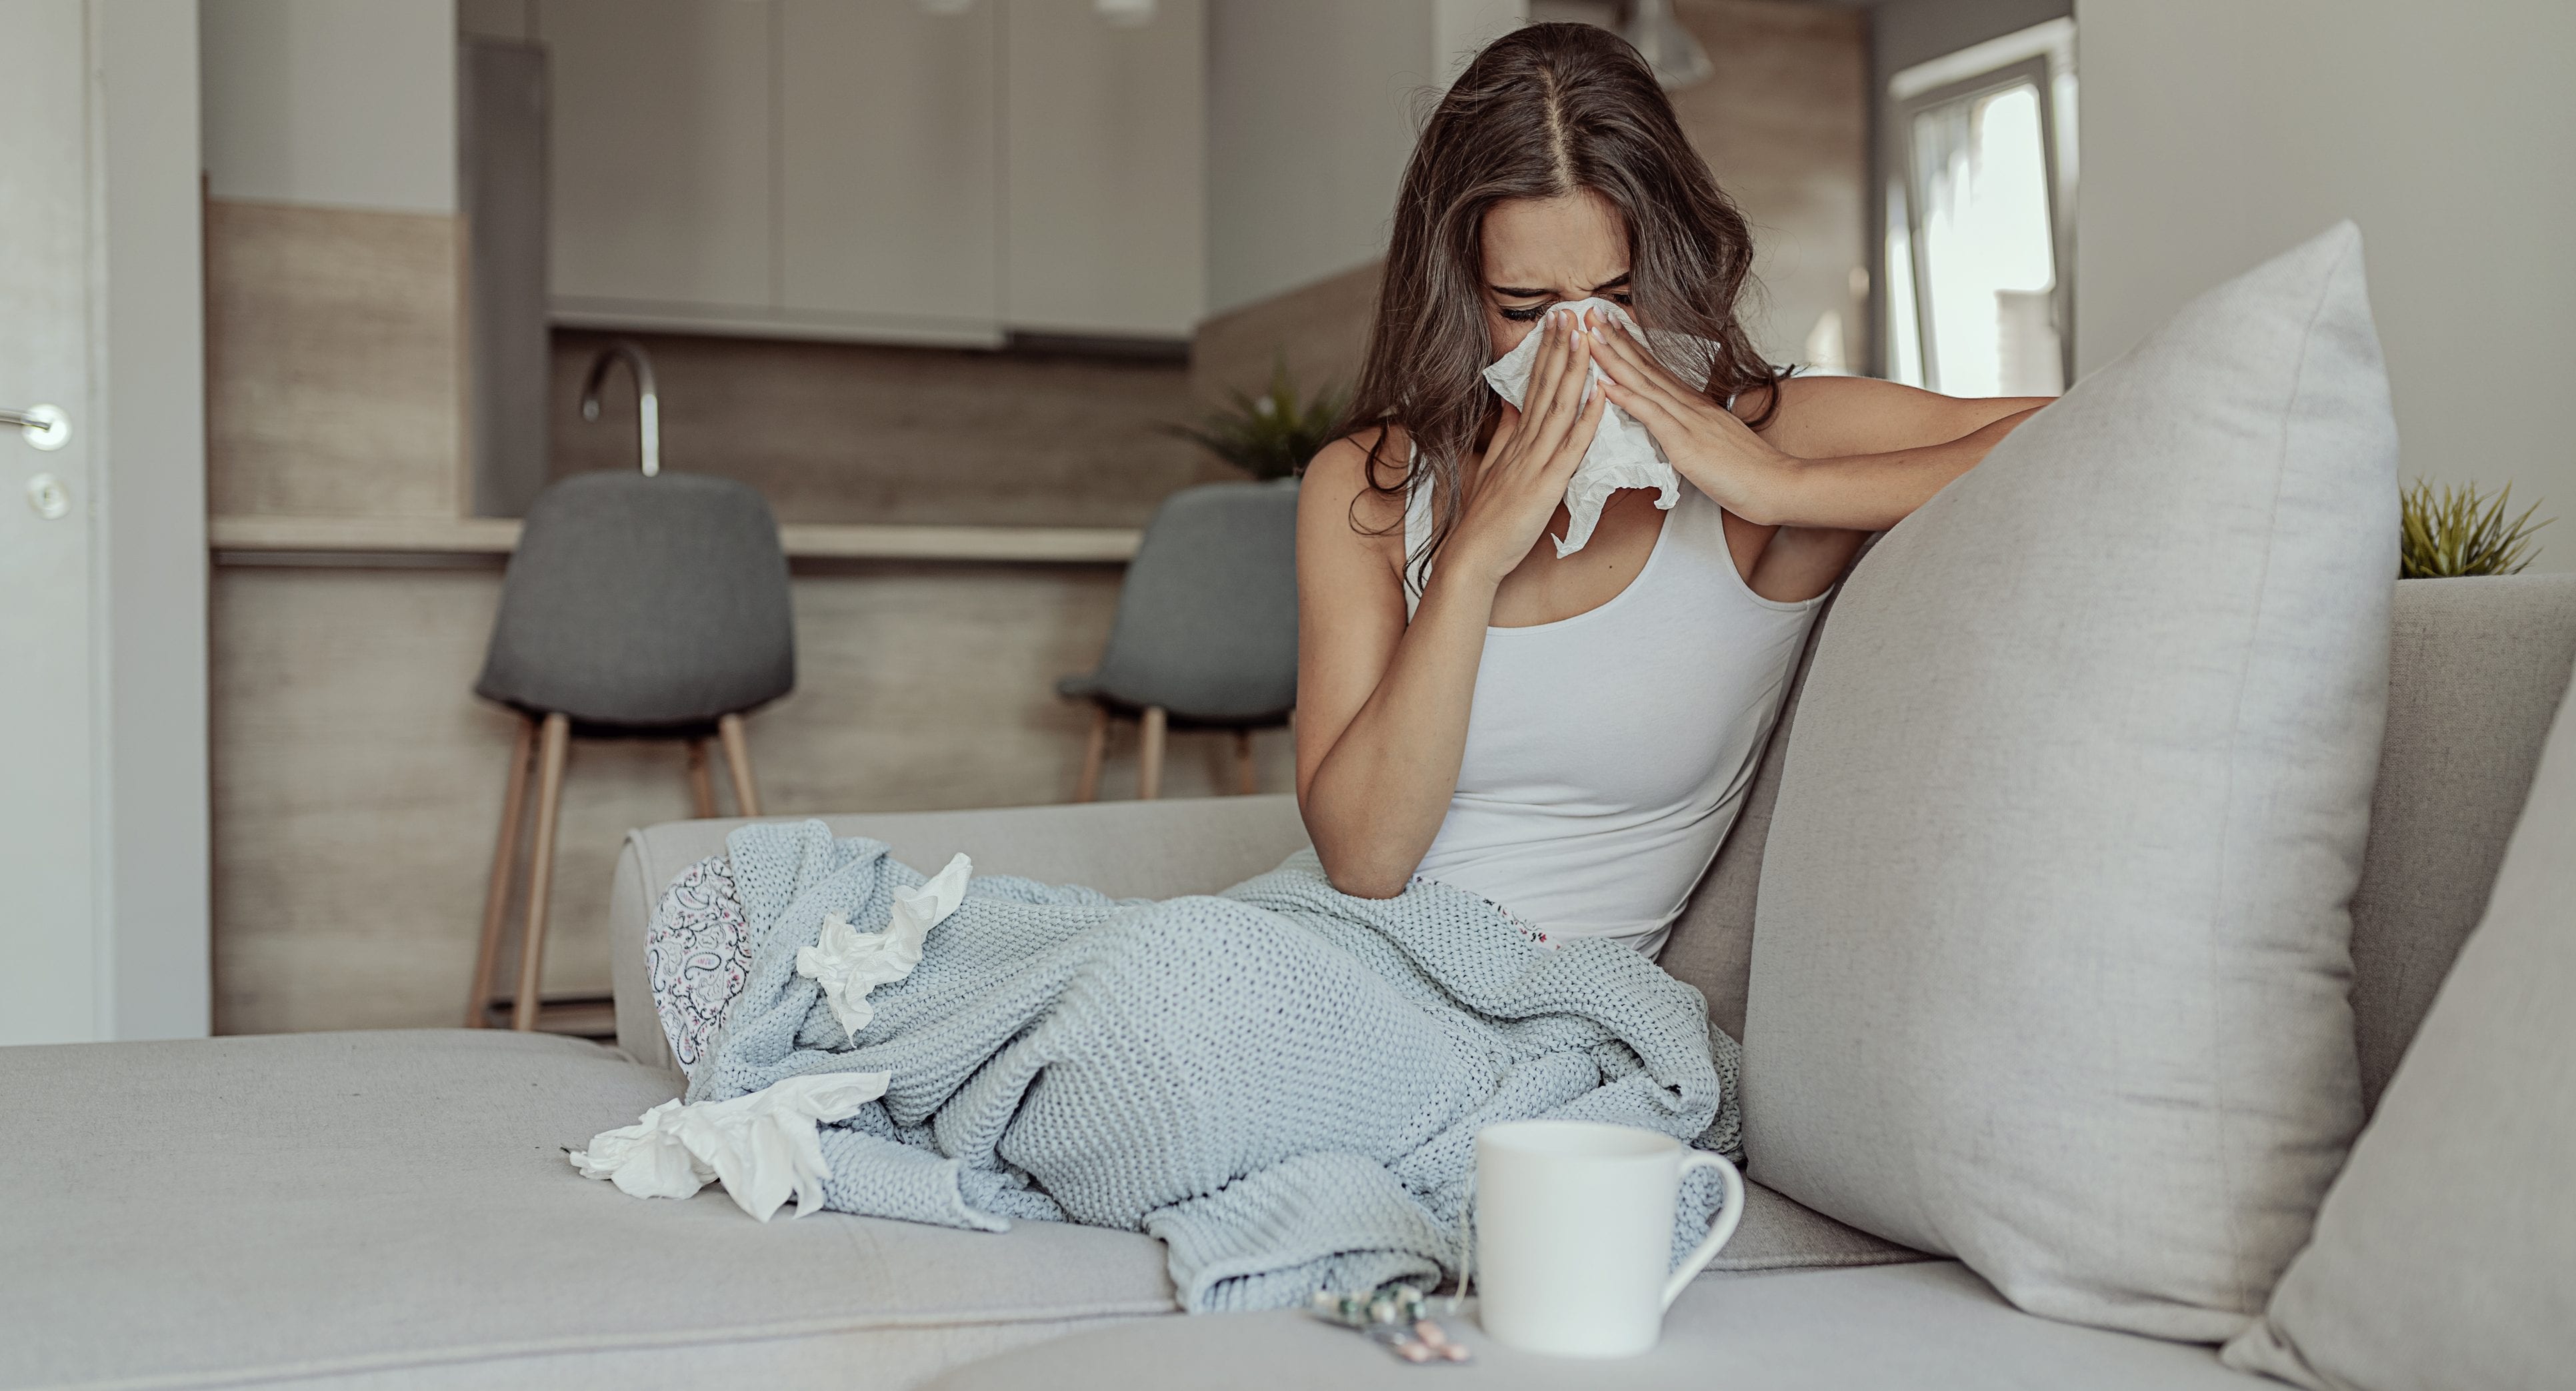 Sick Woman Covered With a Blanket Lying in Bed With High Fever and a Flu, Resting at Living Room. She Is Exhausted and Suffering From Flu. Sick Woman With Runny Nose Lying in Bed. Girl Suffering From Cold Lying in Bed With Tissue Blowing Her Nose While Sitting on the Sofa